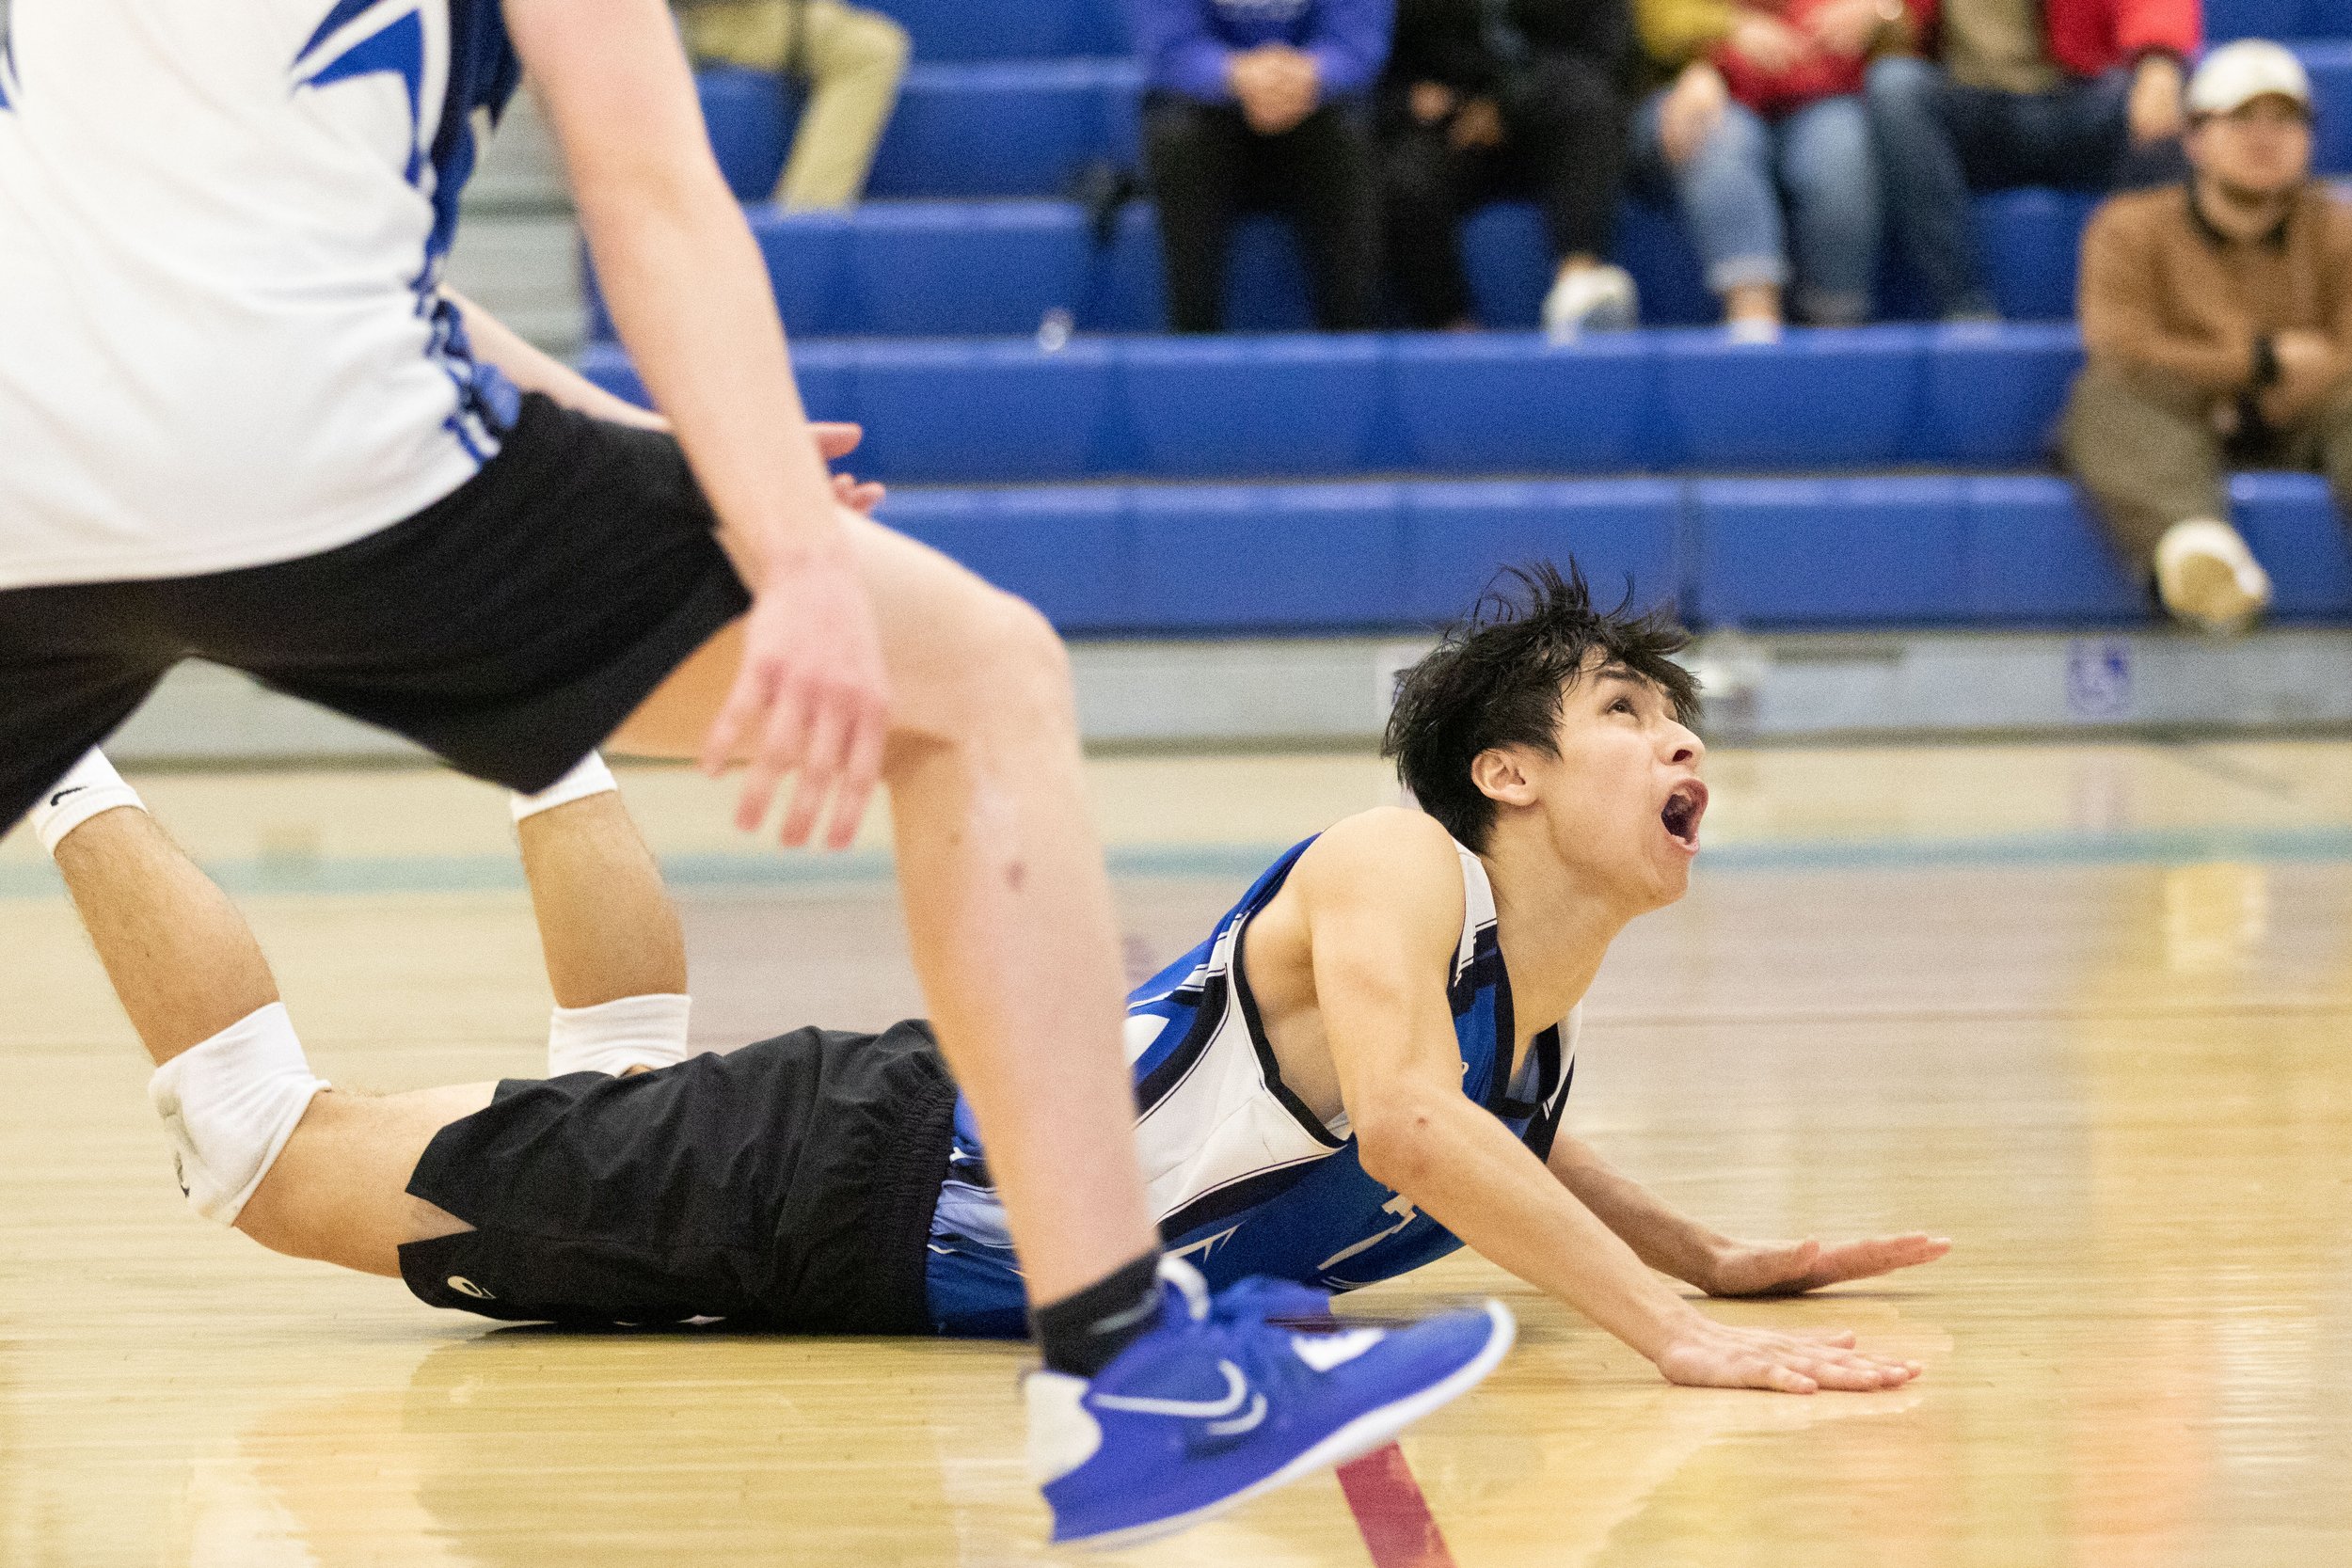  Santa Monica College Corsair libero Javier Castillo (7) after diving for the ball to prevent a kill by Long Beach City College Vikings during the second set of a home game in Santa Monica, Calif., on Friday, March 3, 2023. The game resulted in the C